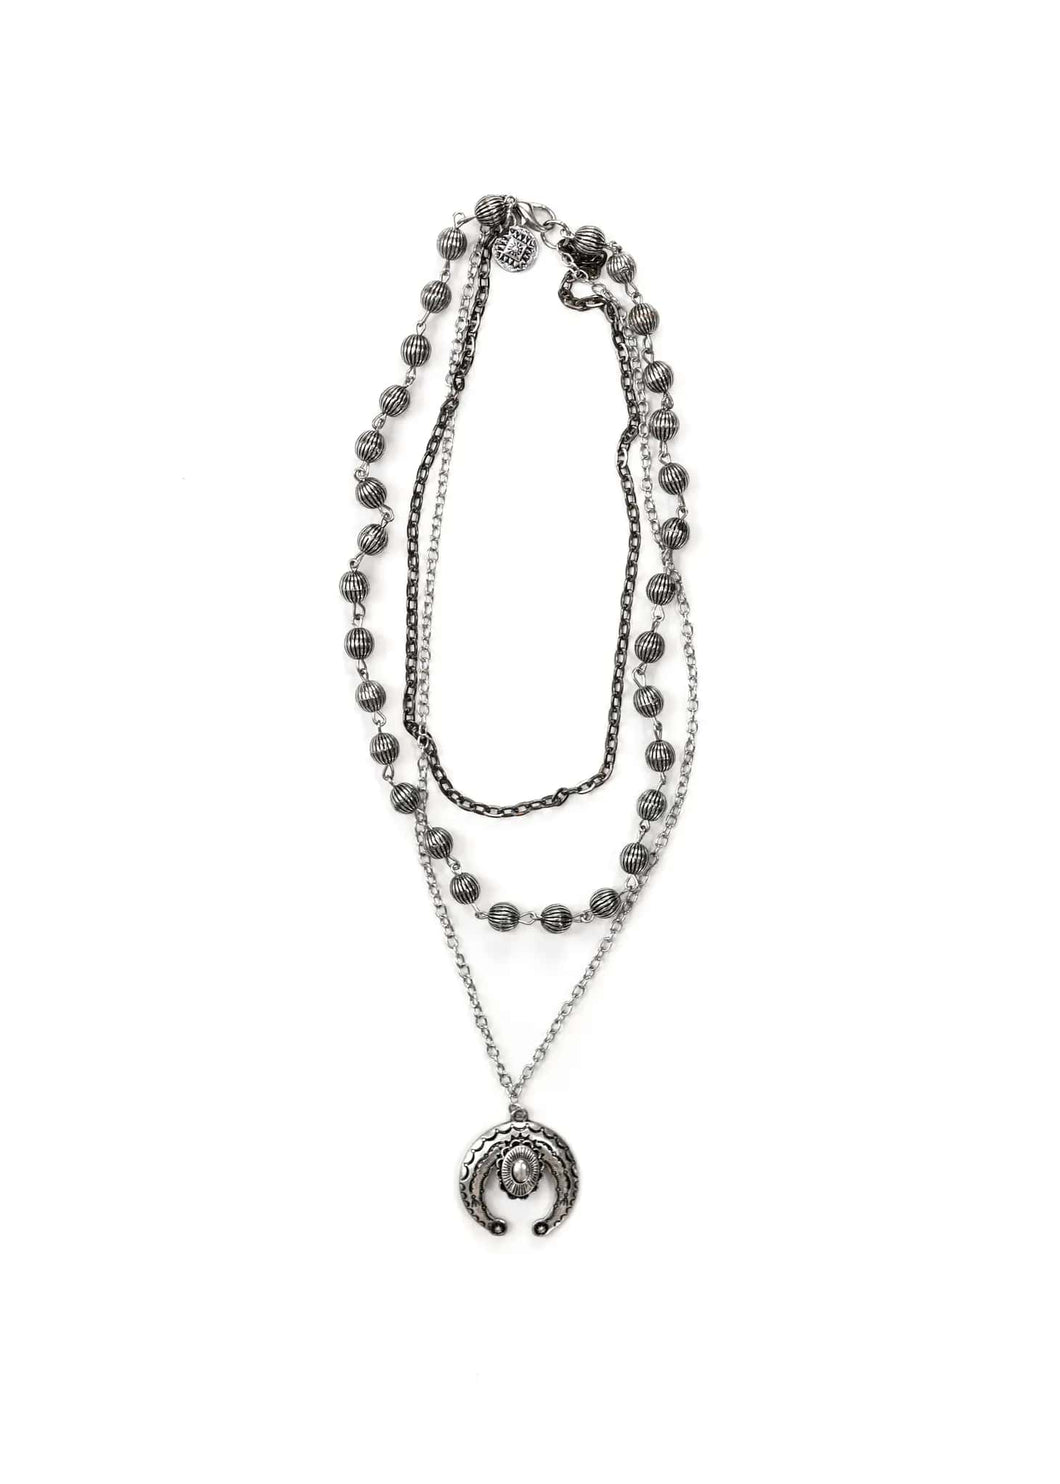 West & Co. 2-Tone Chain Necklace with Naja Pendant